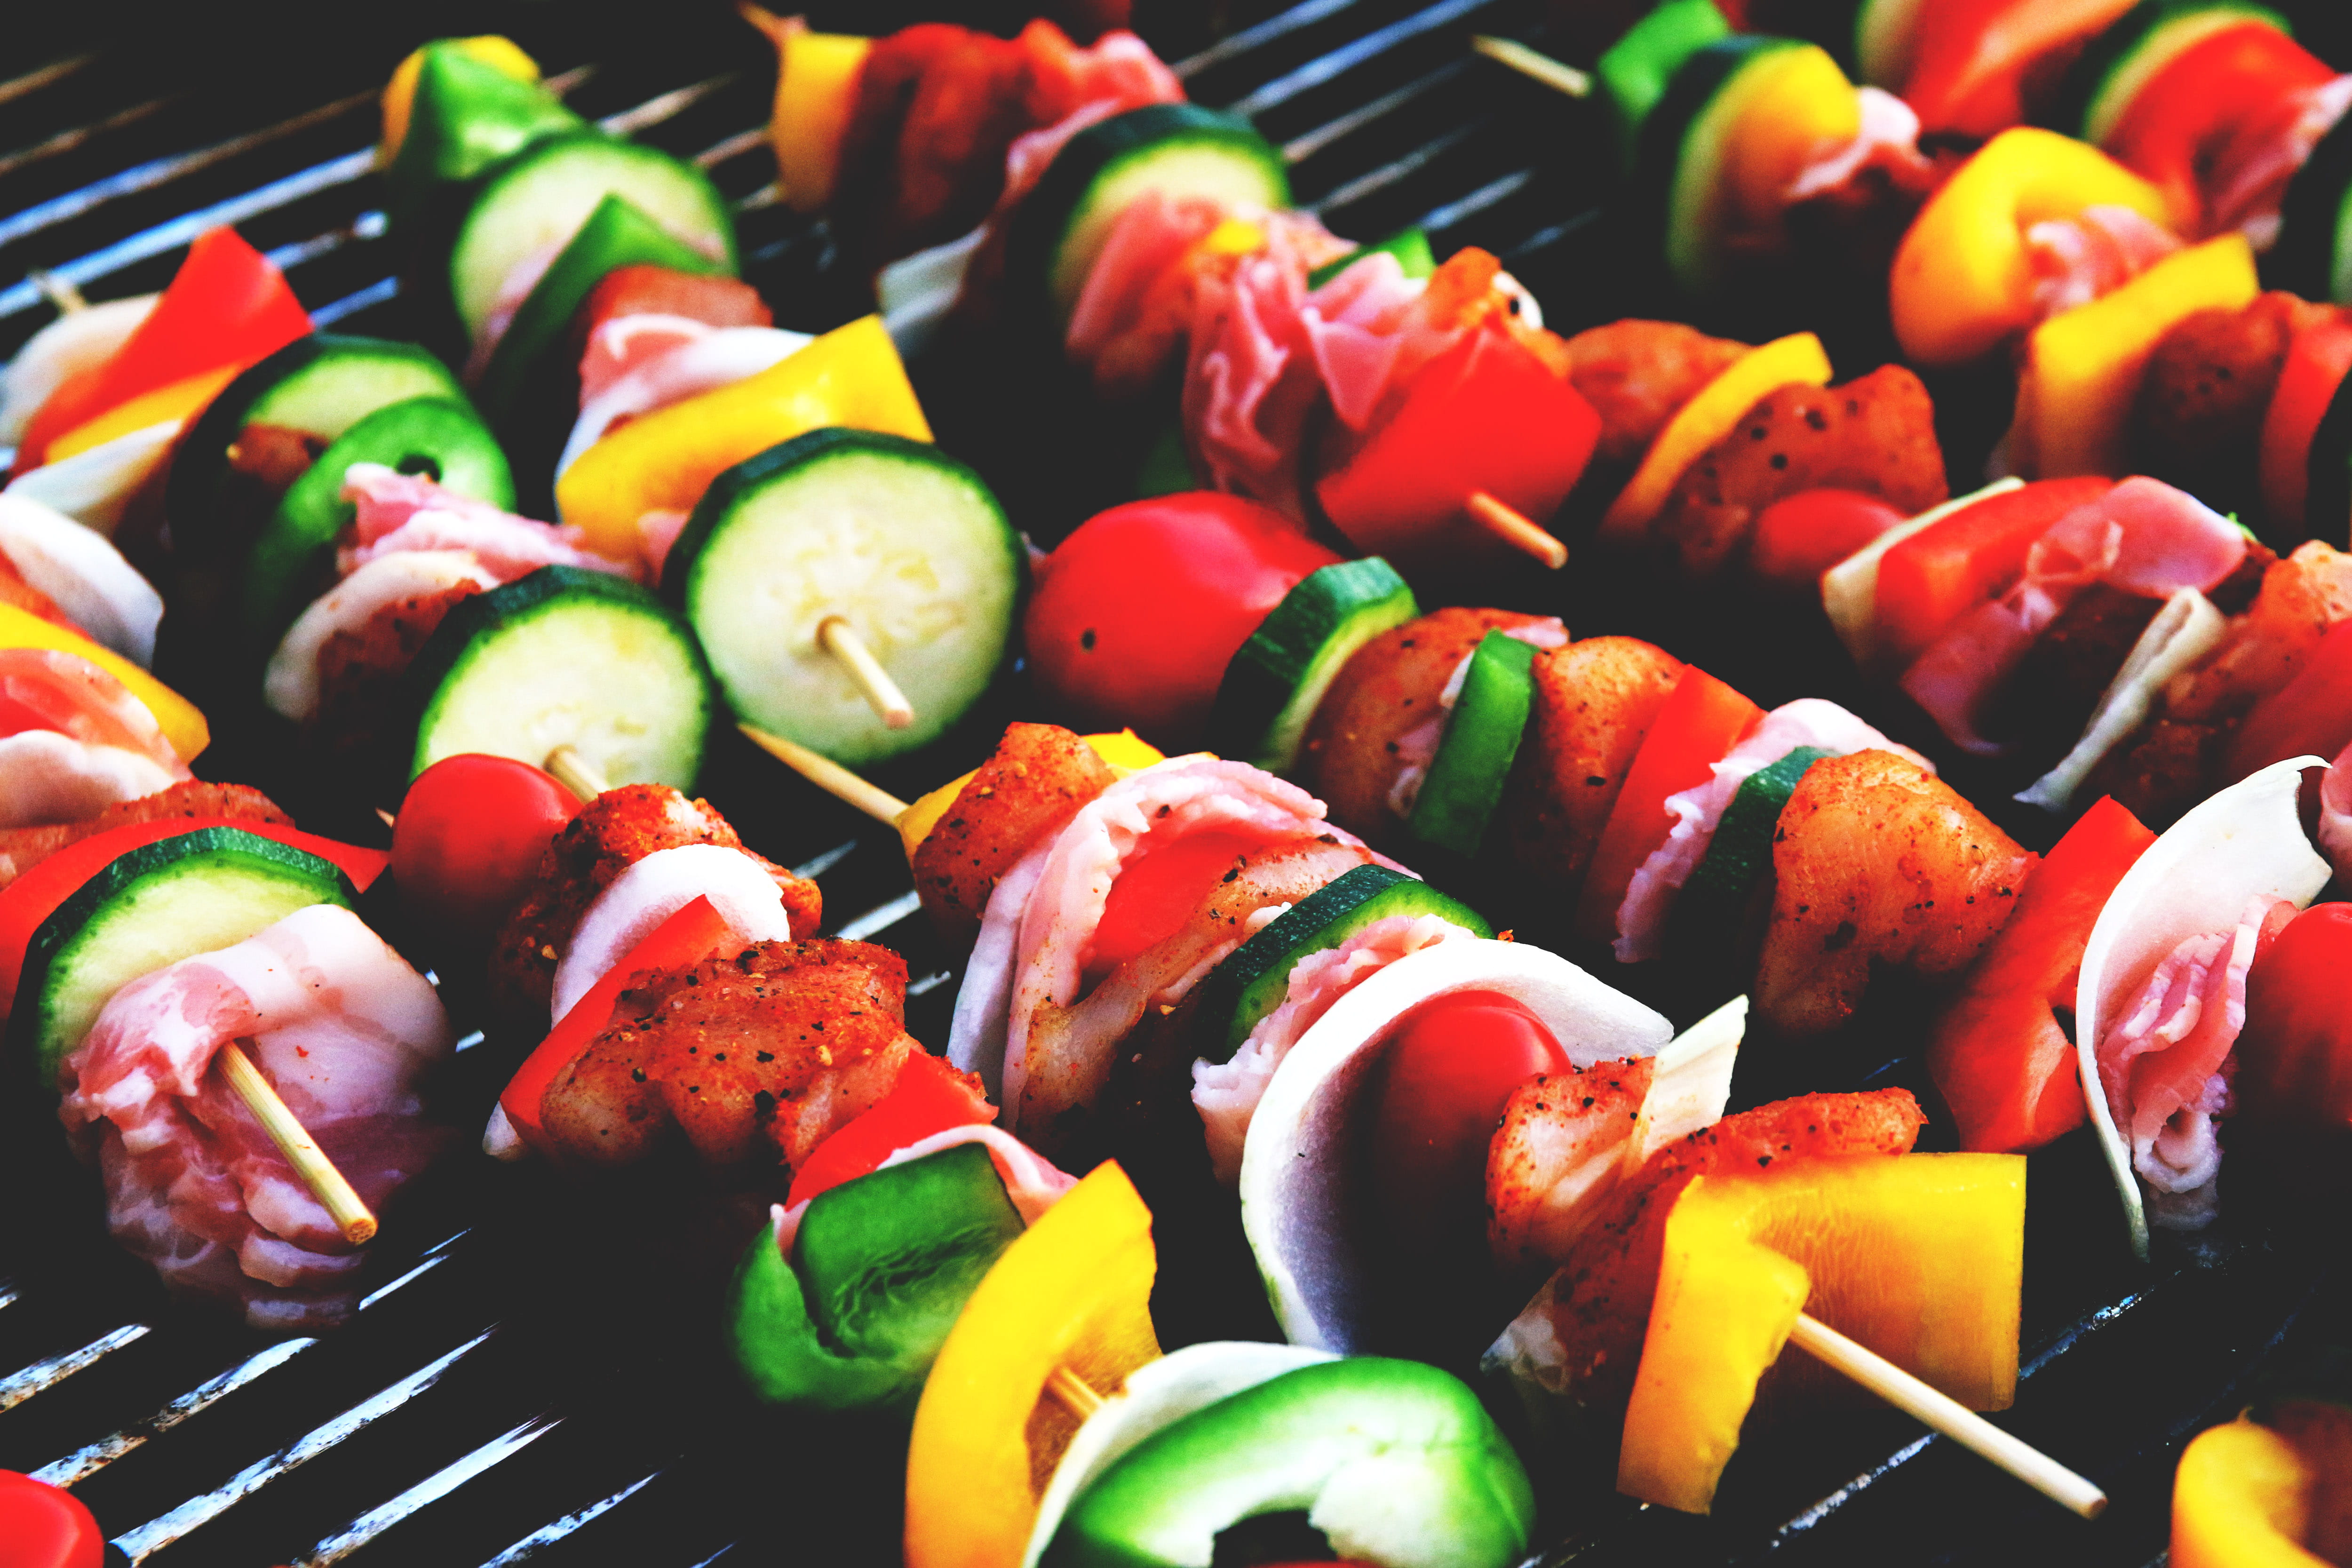 Shish kebab on BBQ, food/Drink, barbecue, barbeque, grill, grilling